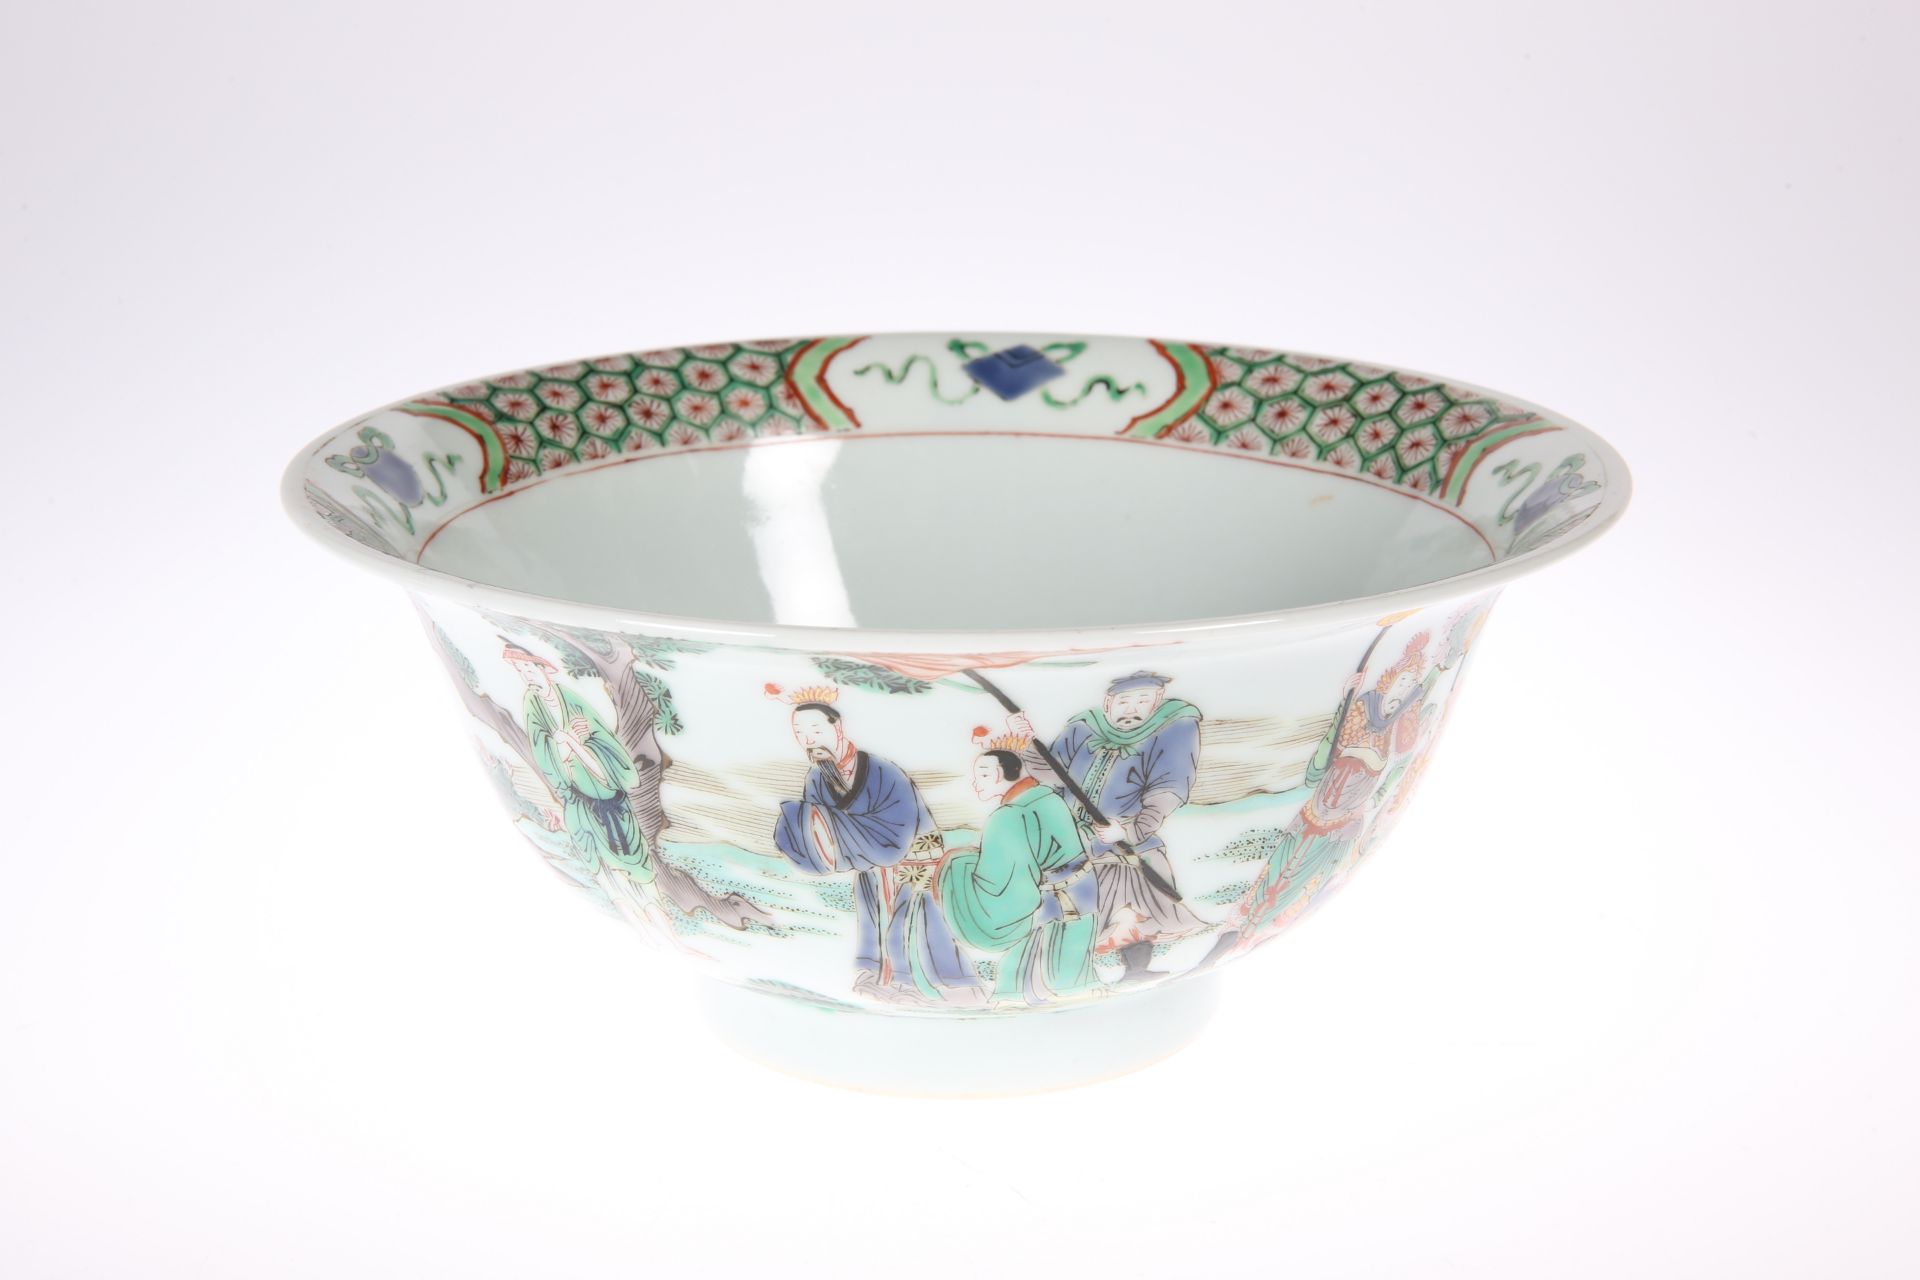 A CHINESE FAMILLE VERTE BOWL, circular with everted rim, the exterior painted with figures in the